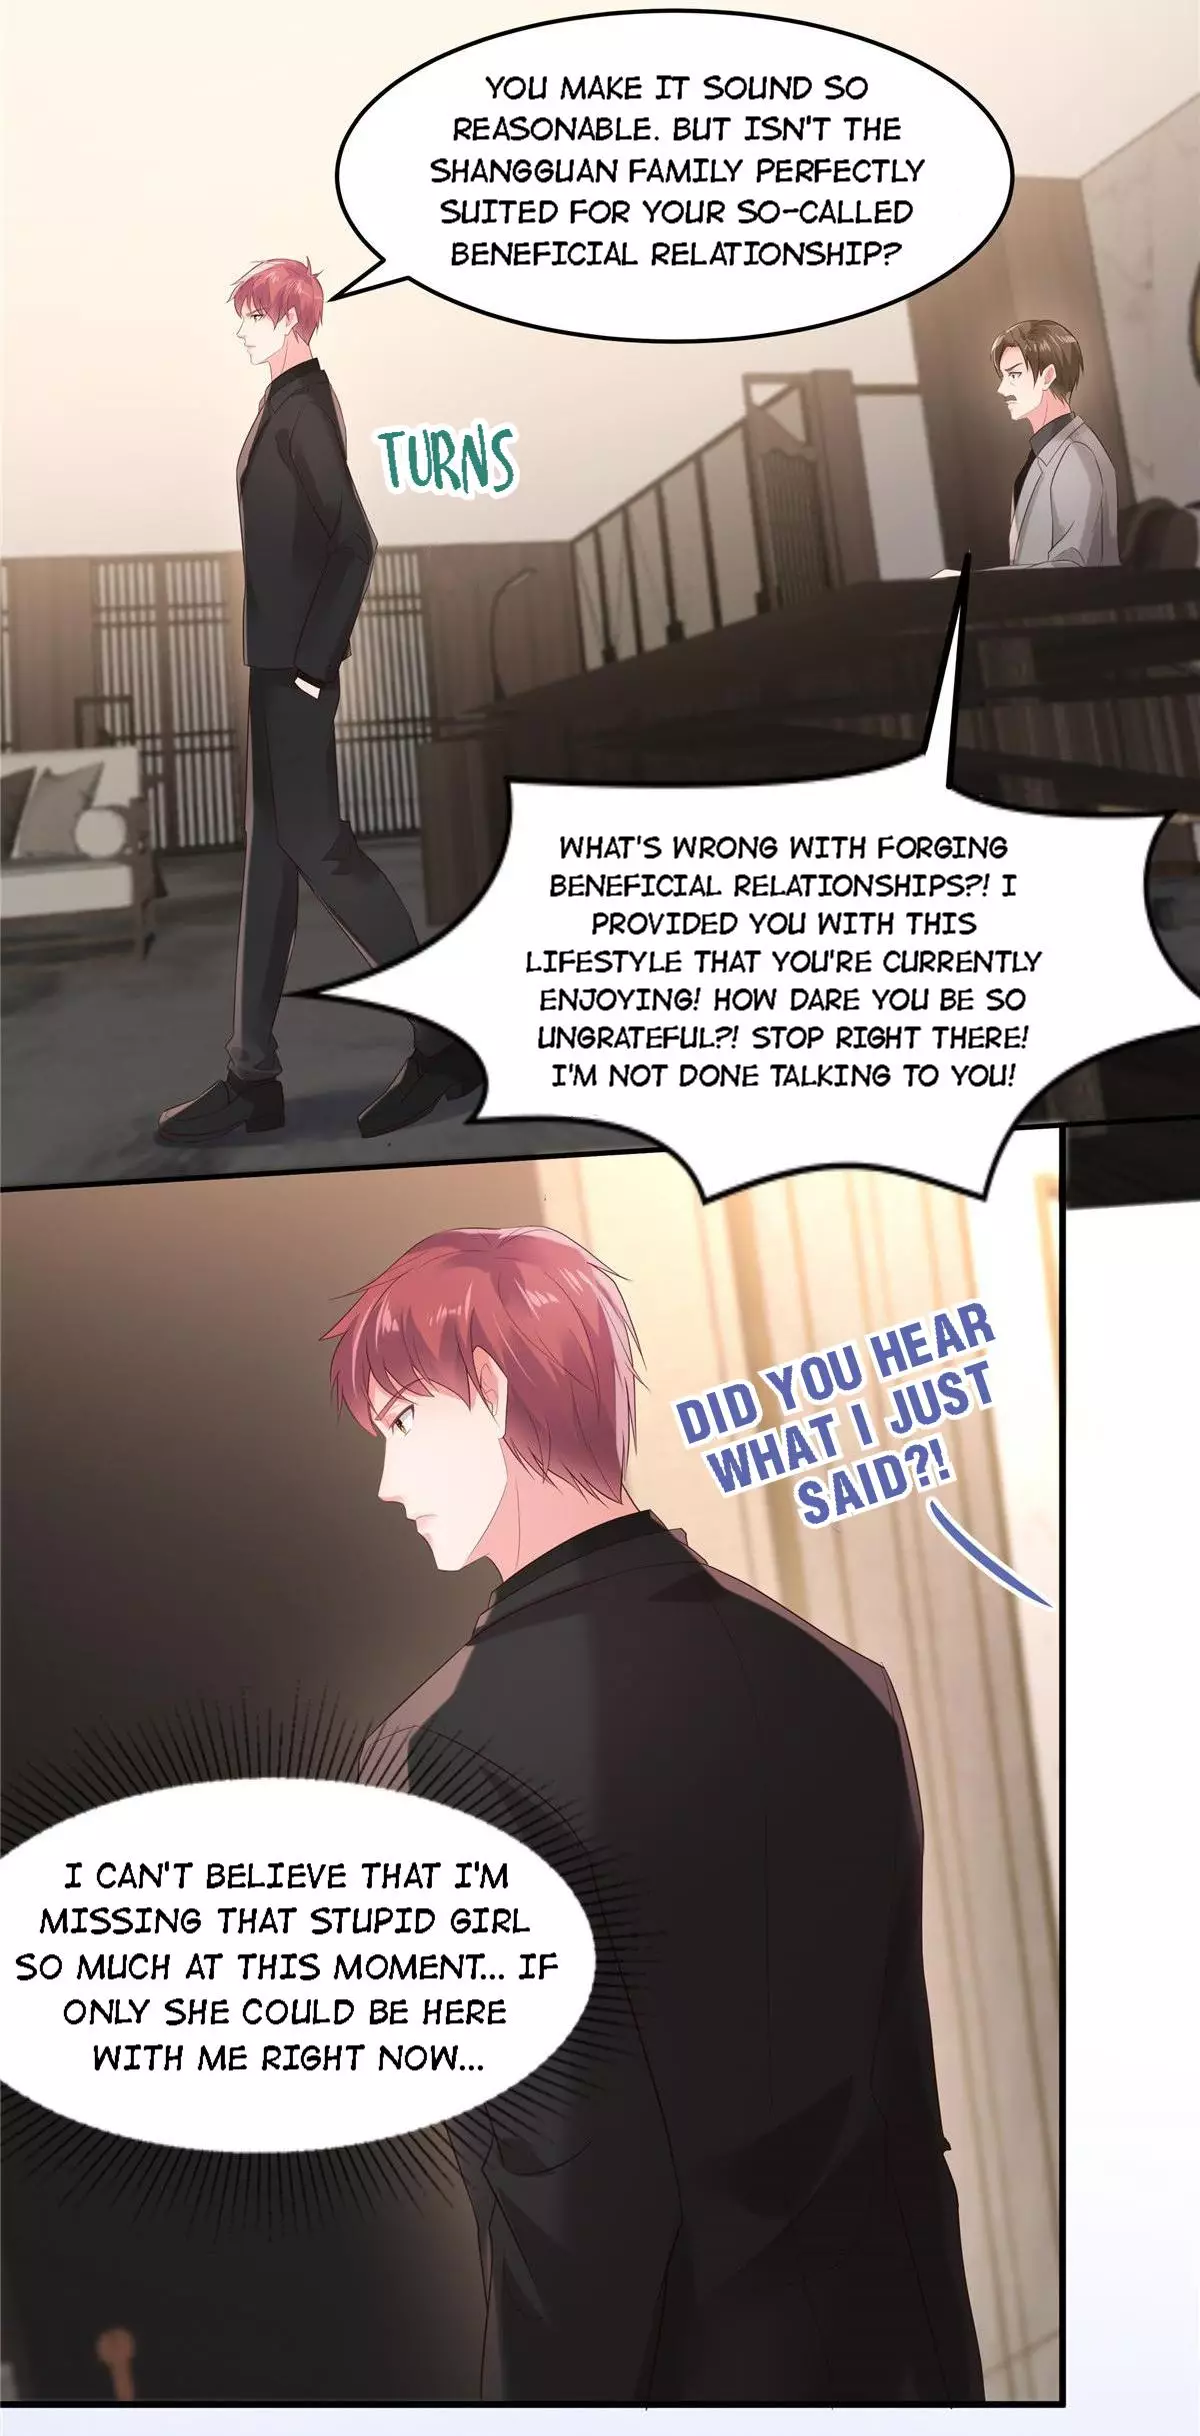 Rebirth: Giving You My Exclusive Affection - 102 page 9-1da38dbb